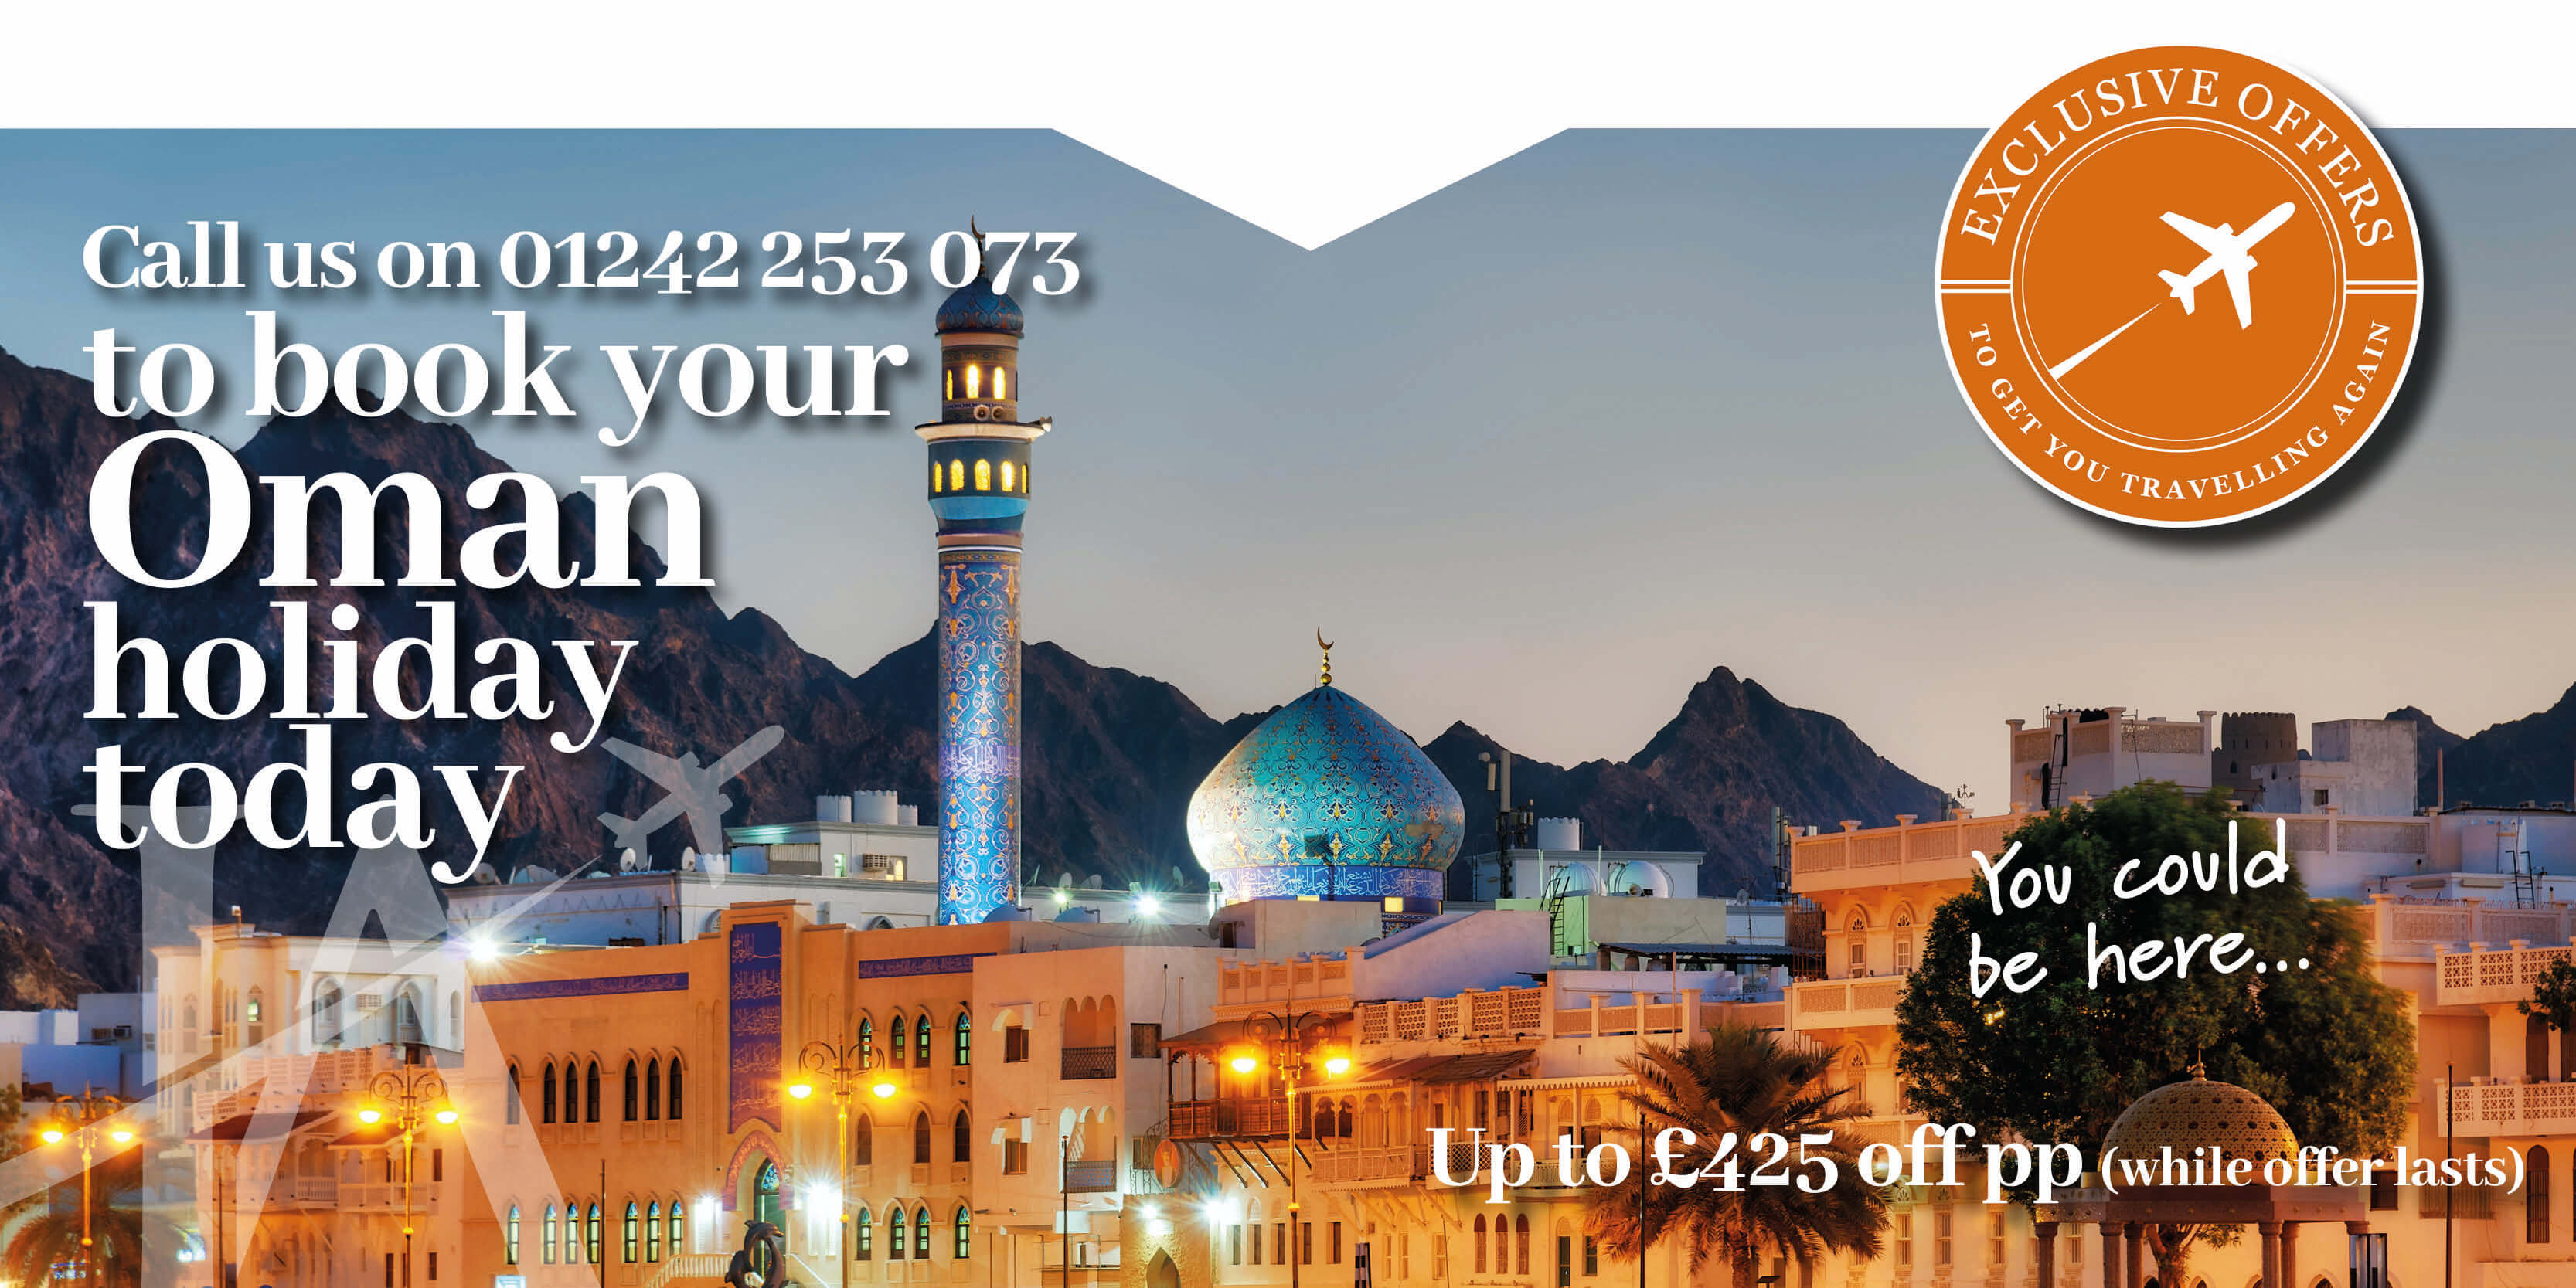 Oman holiday offer get in touch